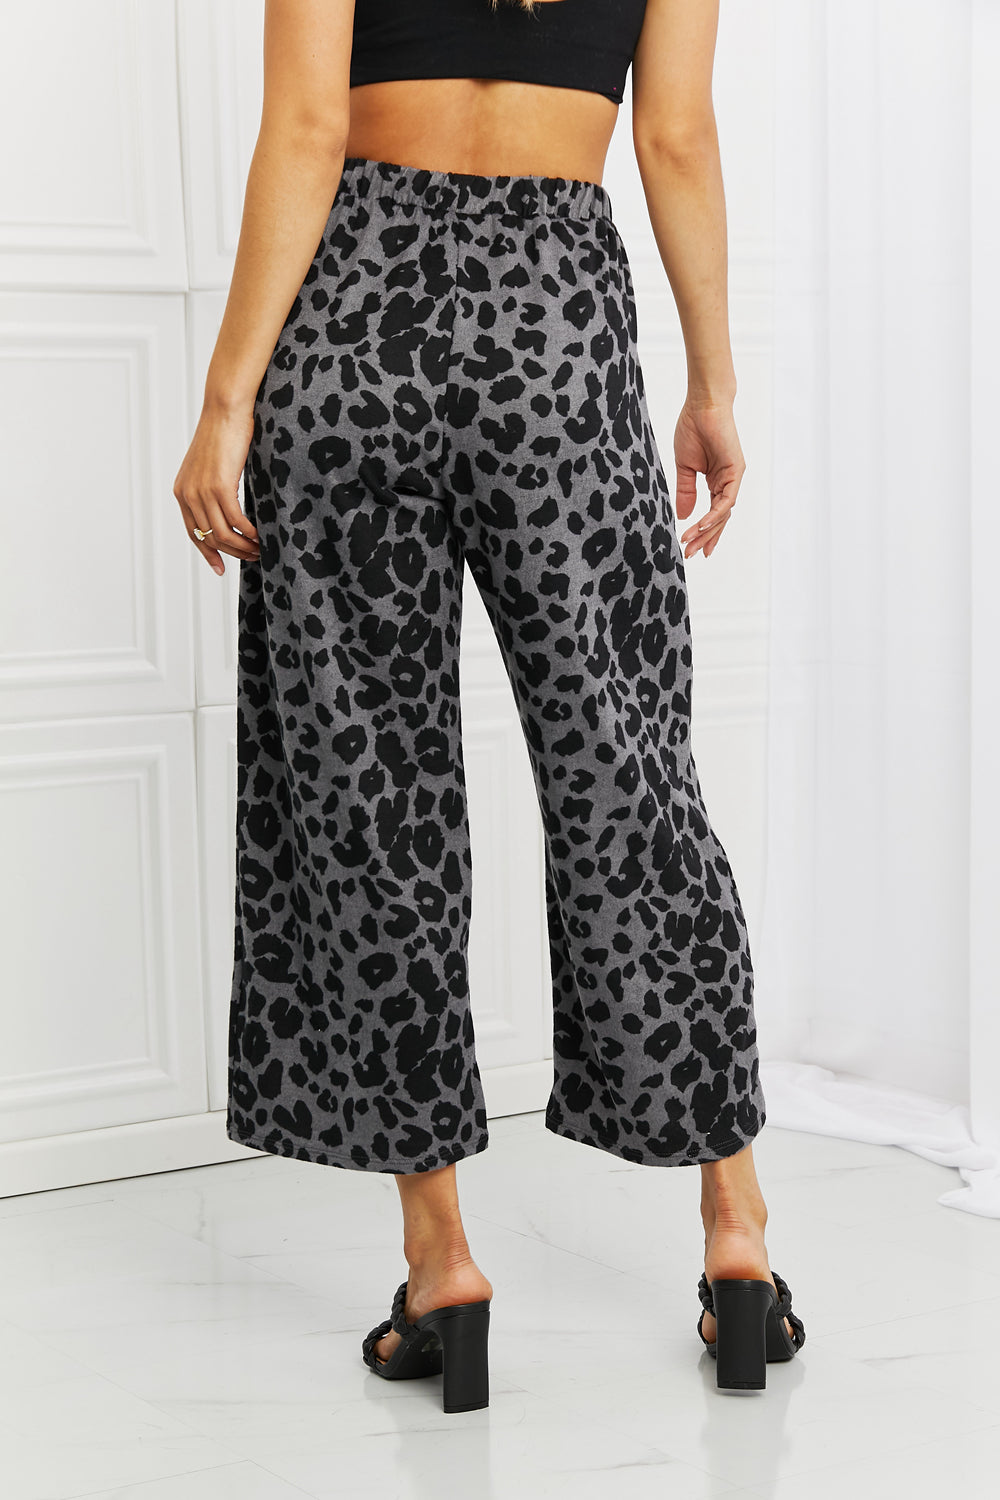 BOMBOM Stay Cozy Pattern Wide Leg Pants free shipping -Oh Em Gee Boutique